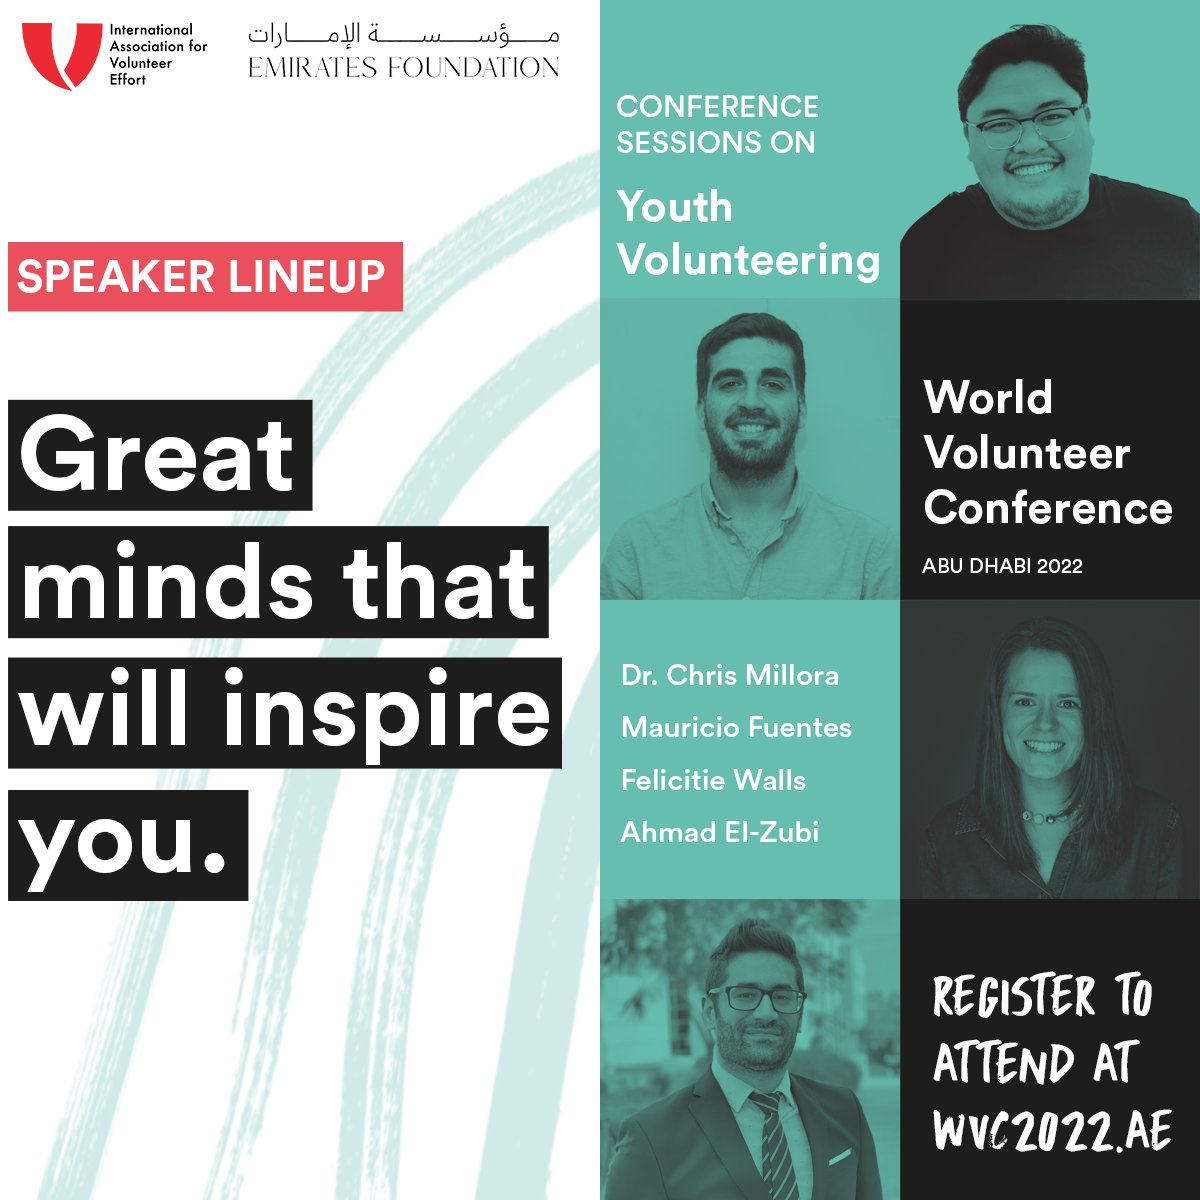 #SpeakersHighlight: Dr. Chris Millora, Mauricio Fuentes, Felicitie Walls and Ahmad El-Zubi will be presenting in sessions focused on #YouthVolunteering. Learn more about our inspiring speakers and register to join them in Abu Dhabi this October: bit.ly/wvcspeakers4